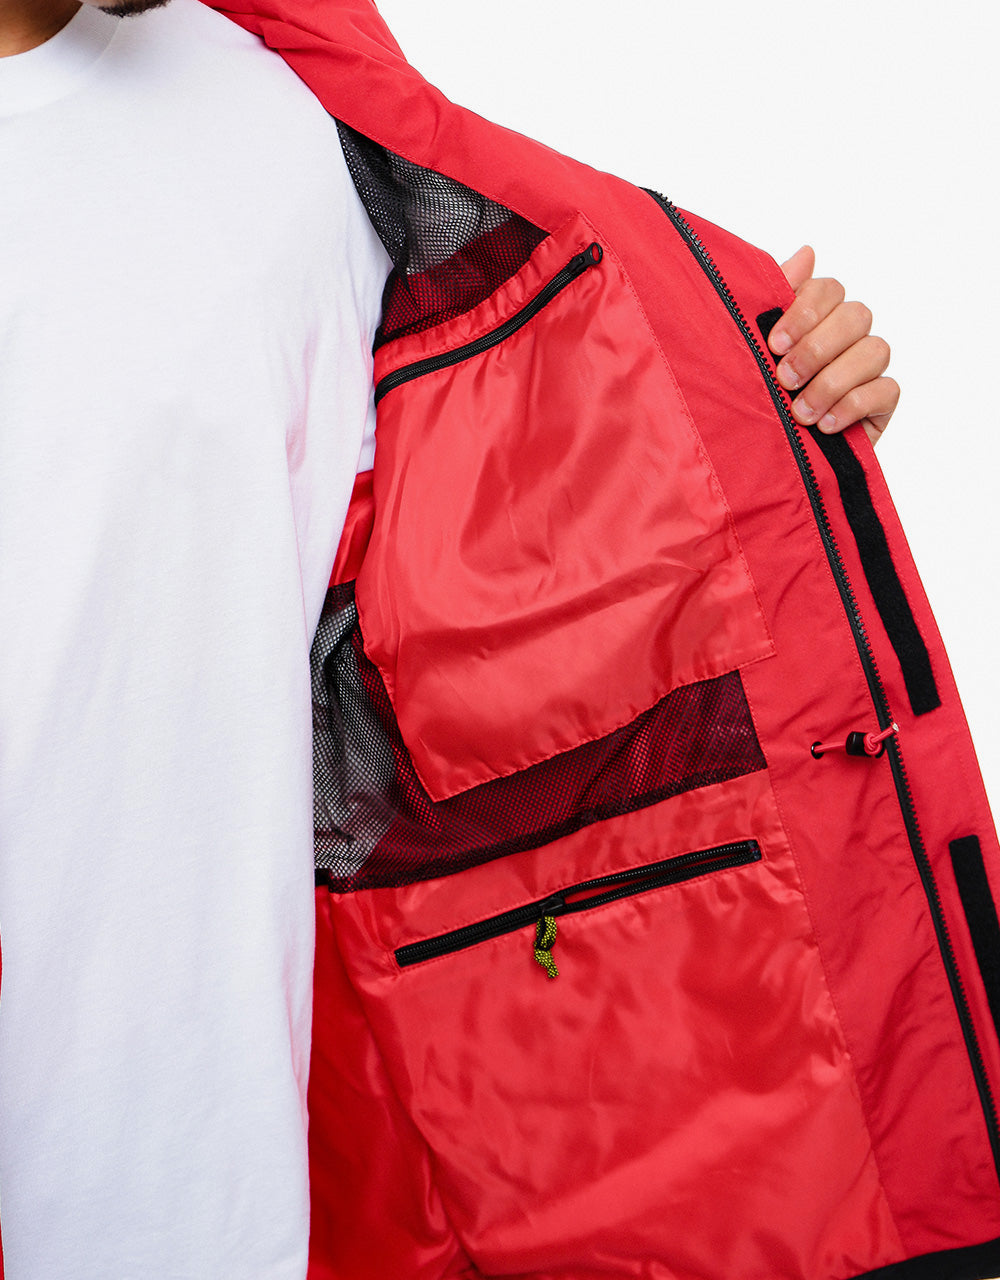 The North Face Black Box Search & Rescue Dryvent Jacket - TNF Red